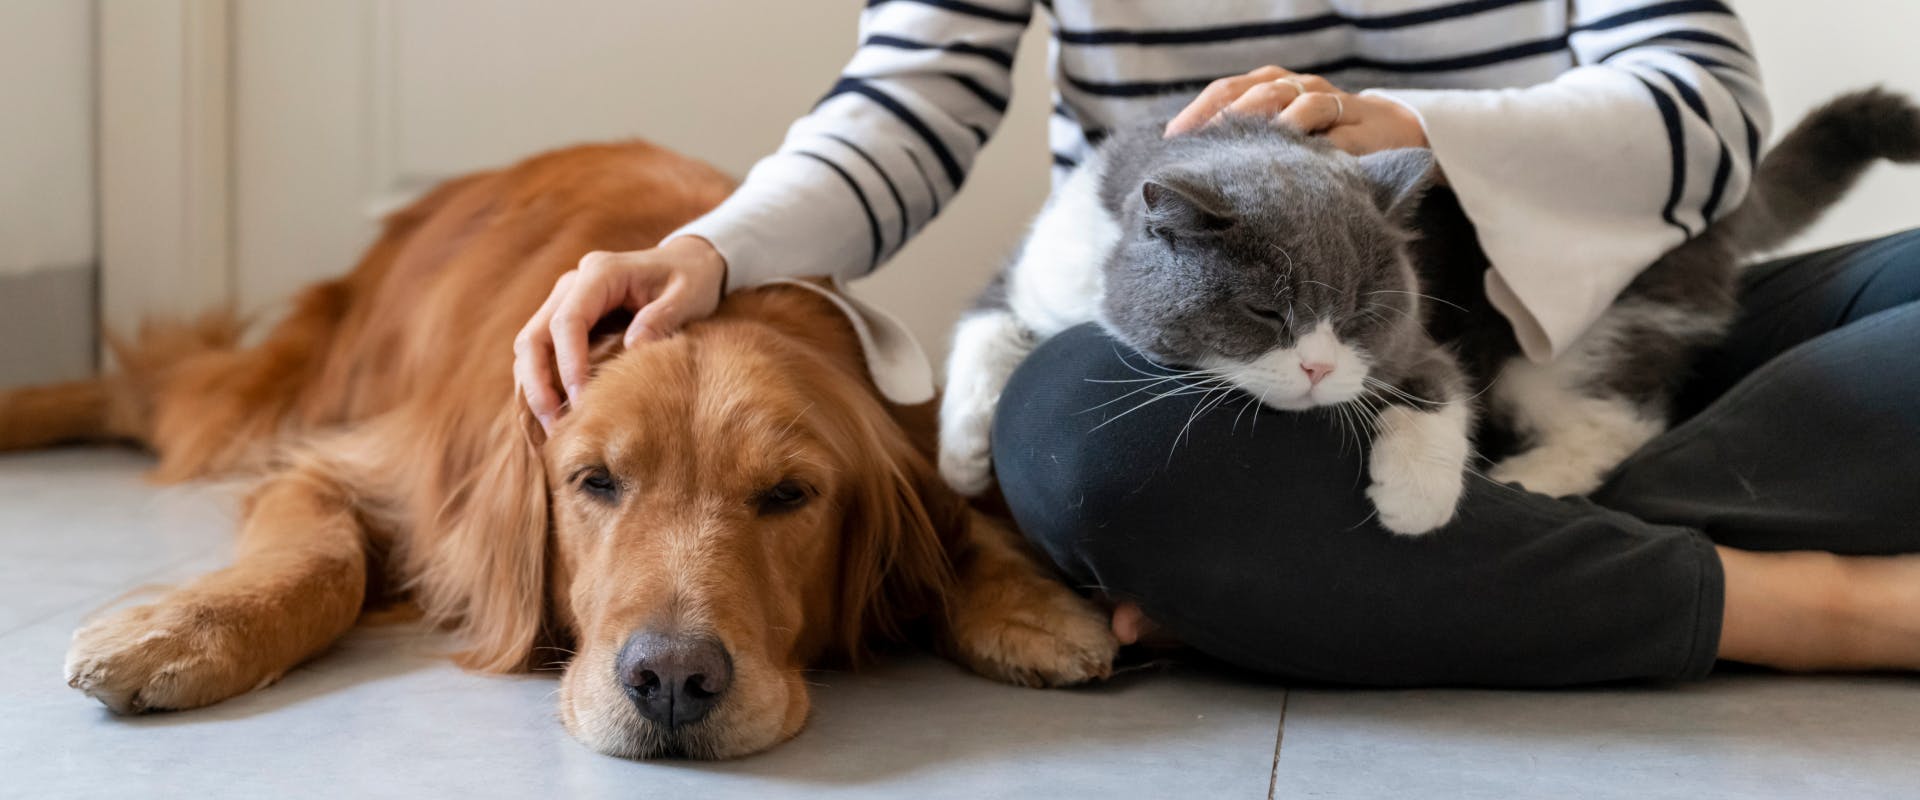 A house and pet sitter sits on the floor with a dog and cat.